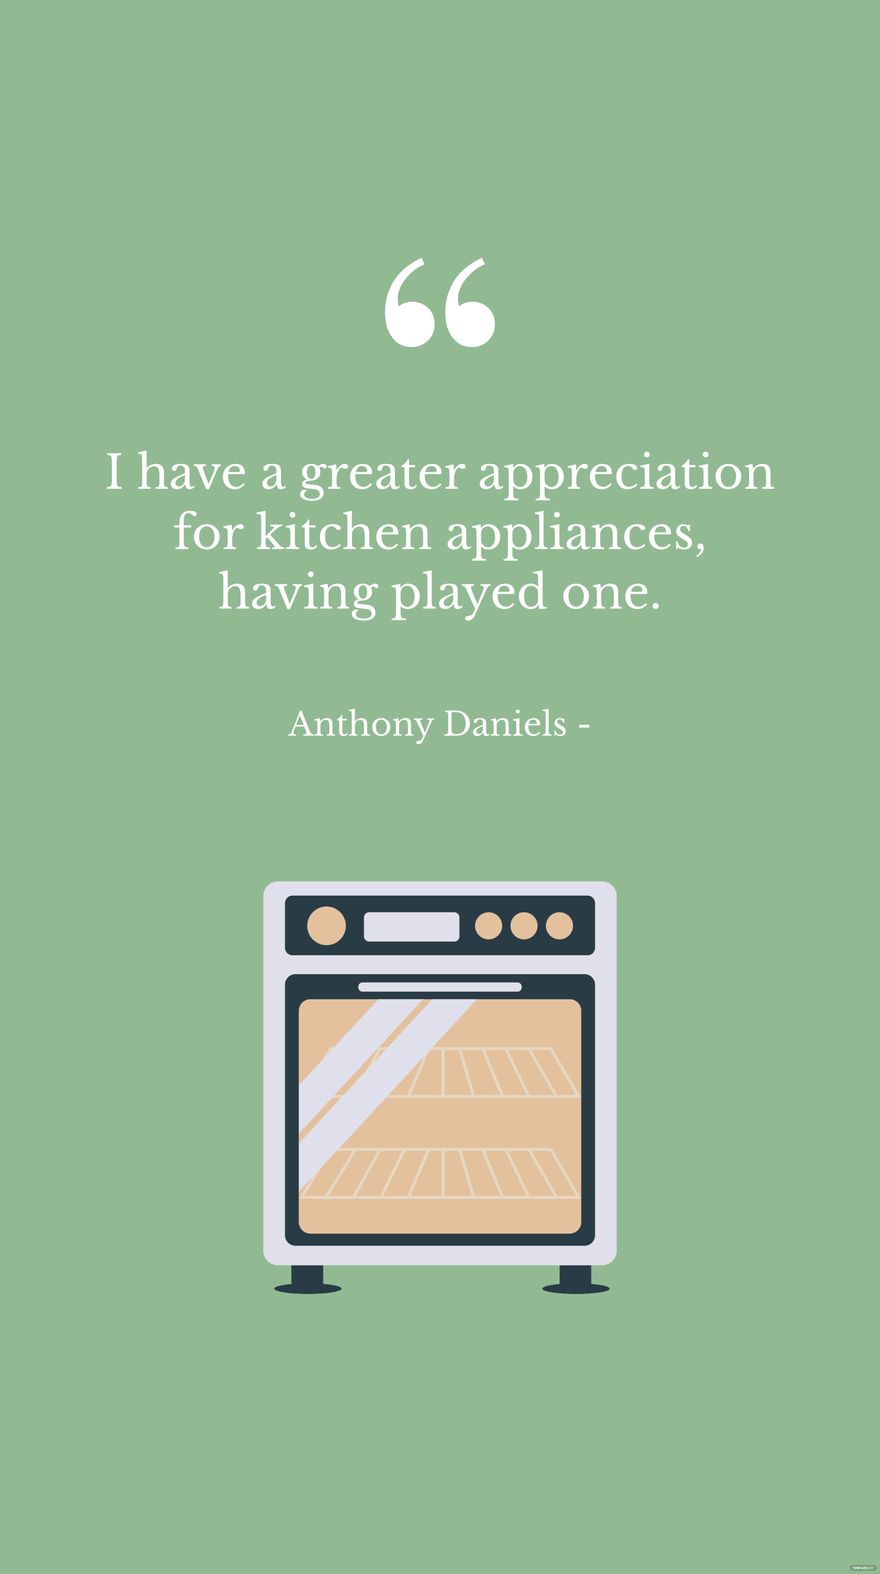 Free Anthony Daniels - I have a greater appreciation for kitchen appliances, having played one. in JPG